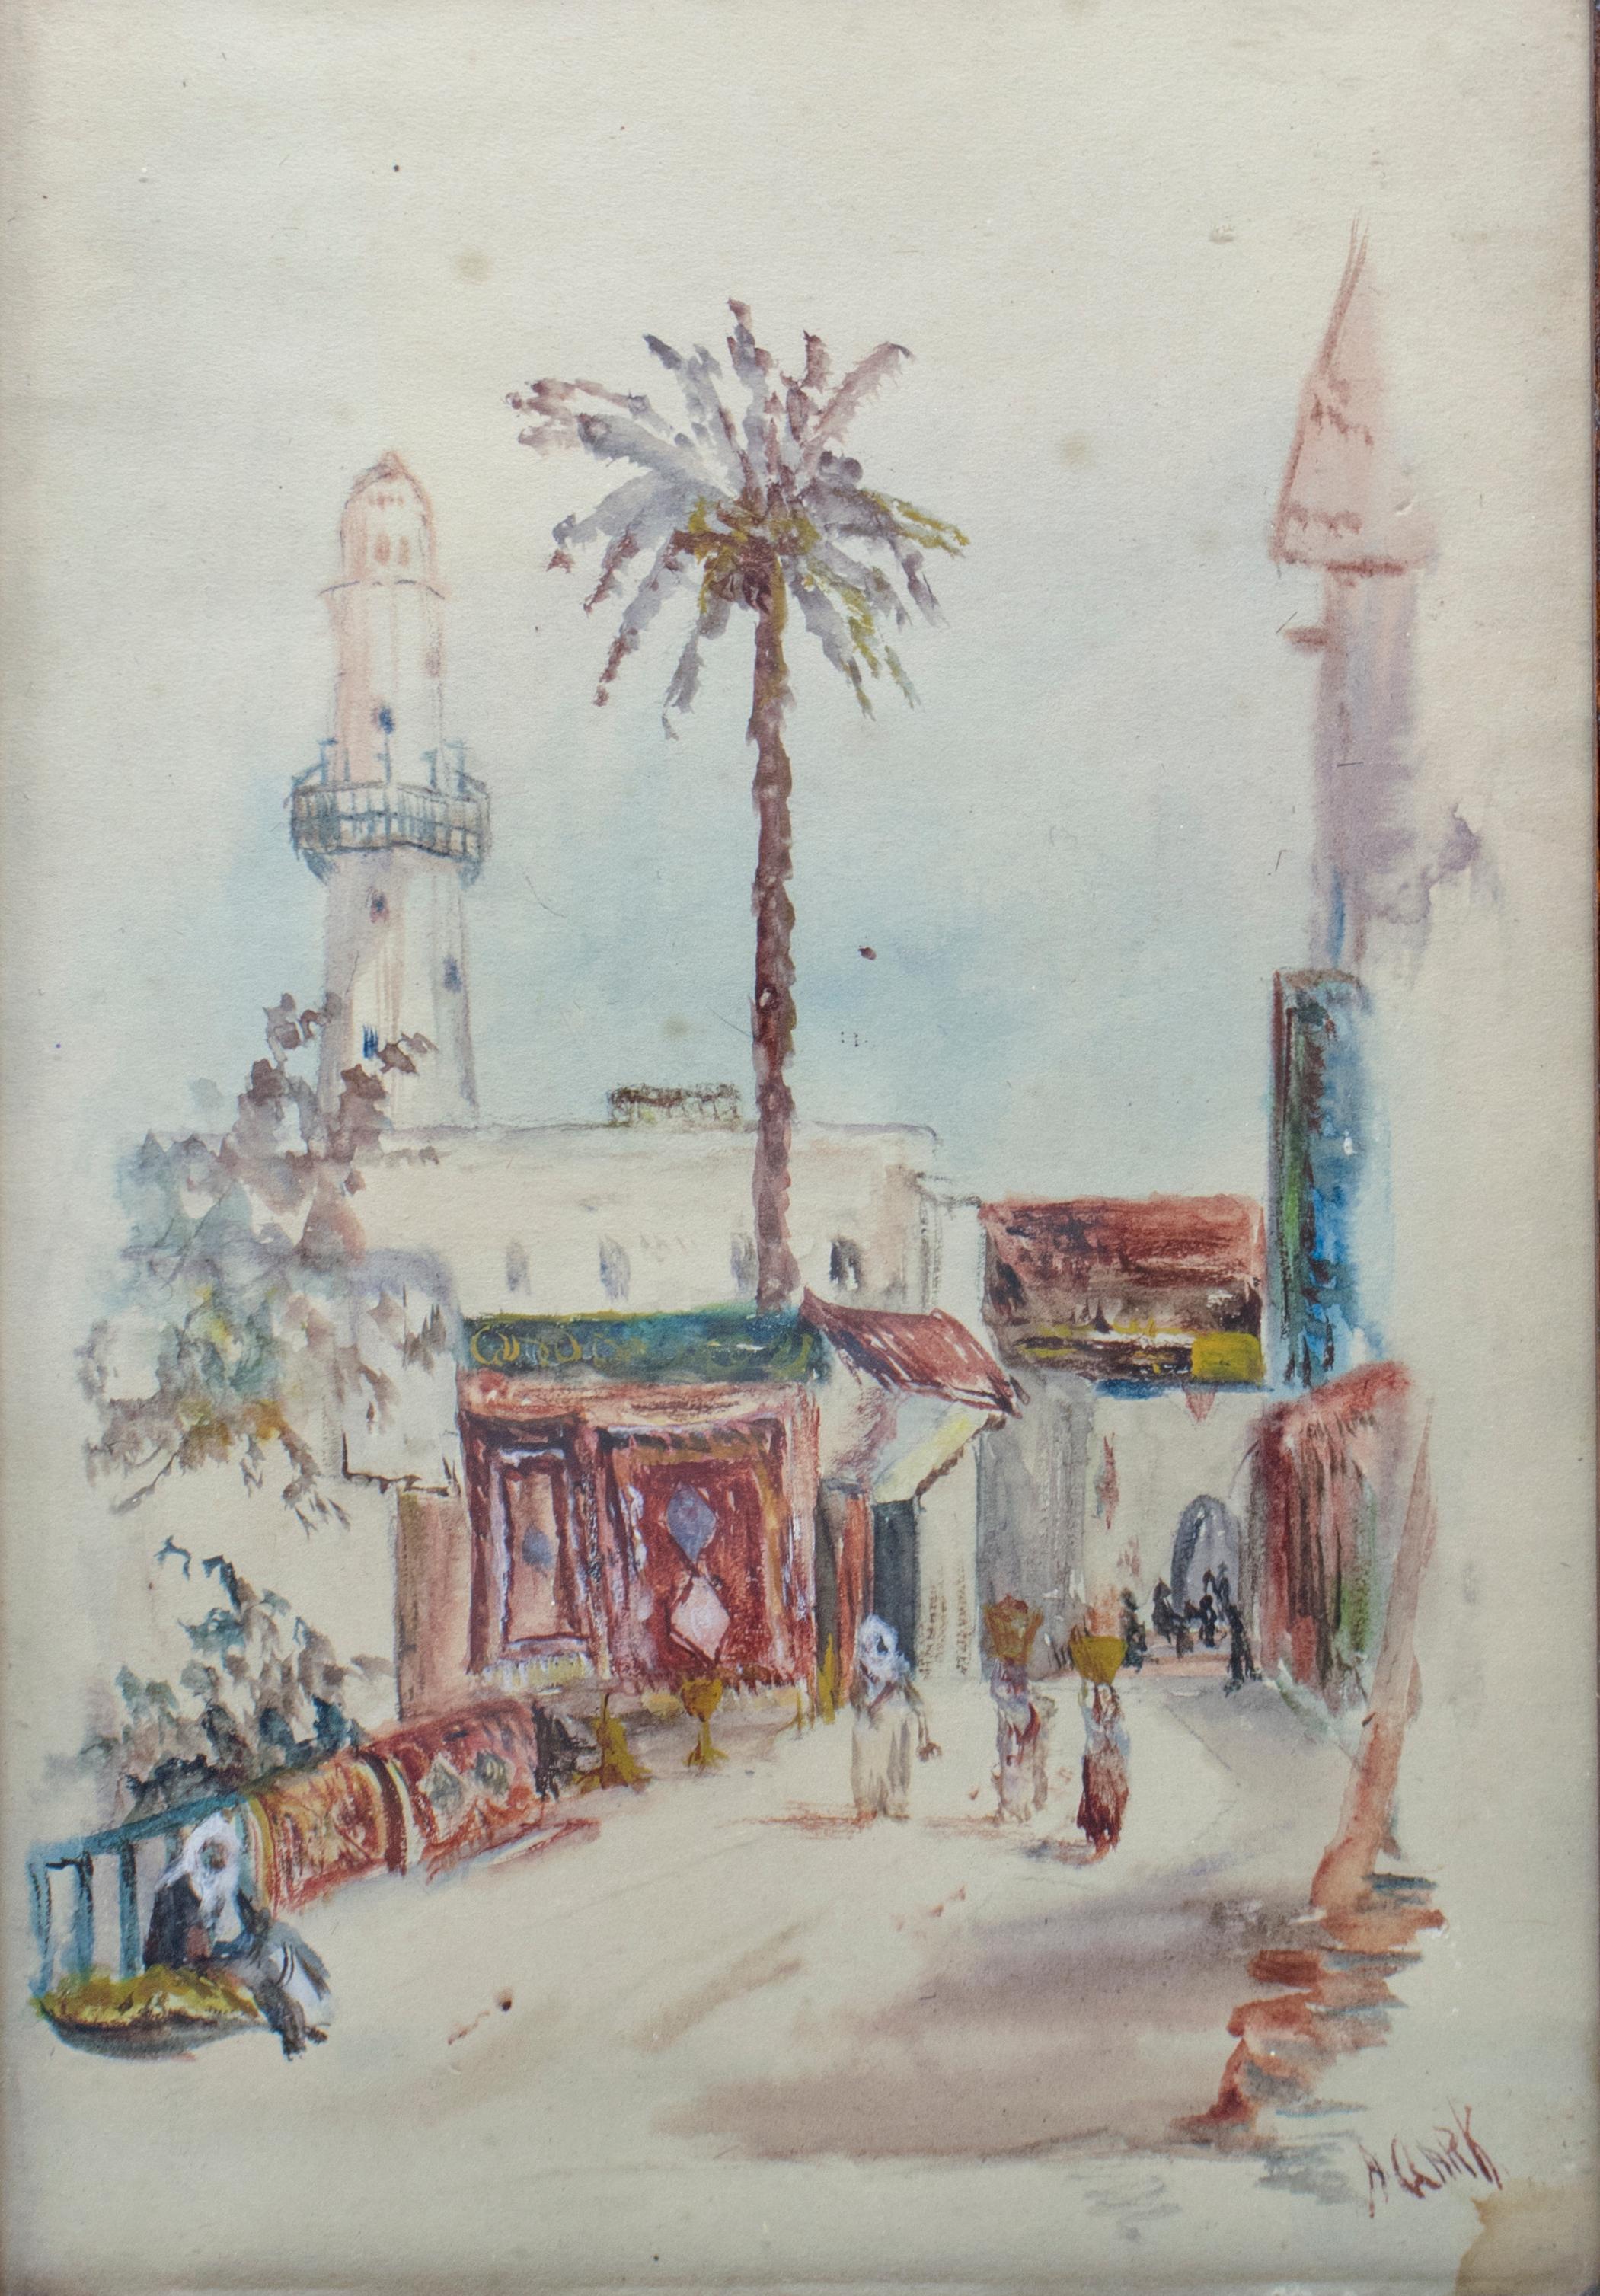 1950s A. Gark Orientalist Arab souk watercolor with frame.

Dimensions with frame: 30 x 23 x 3cm.